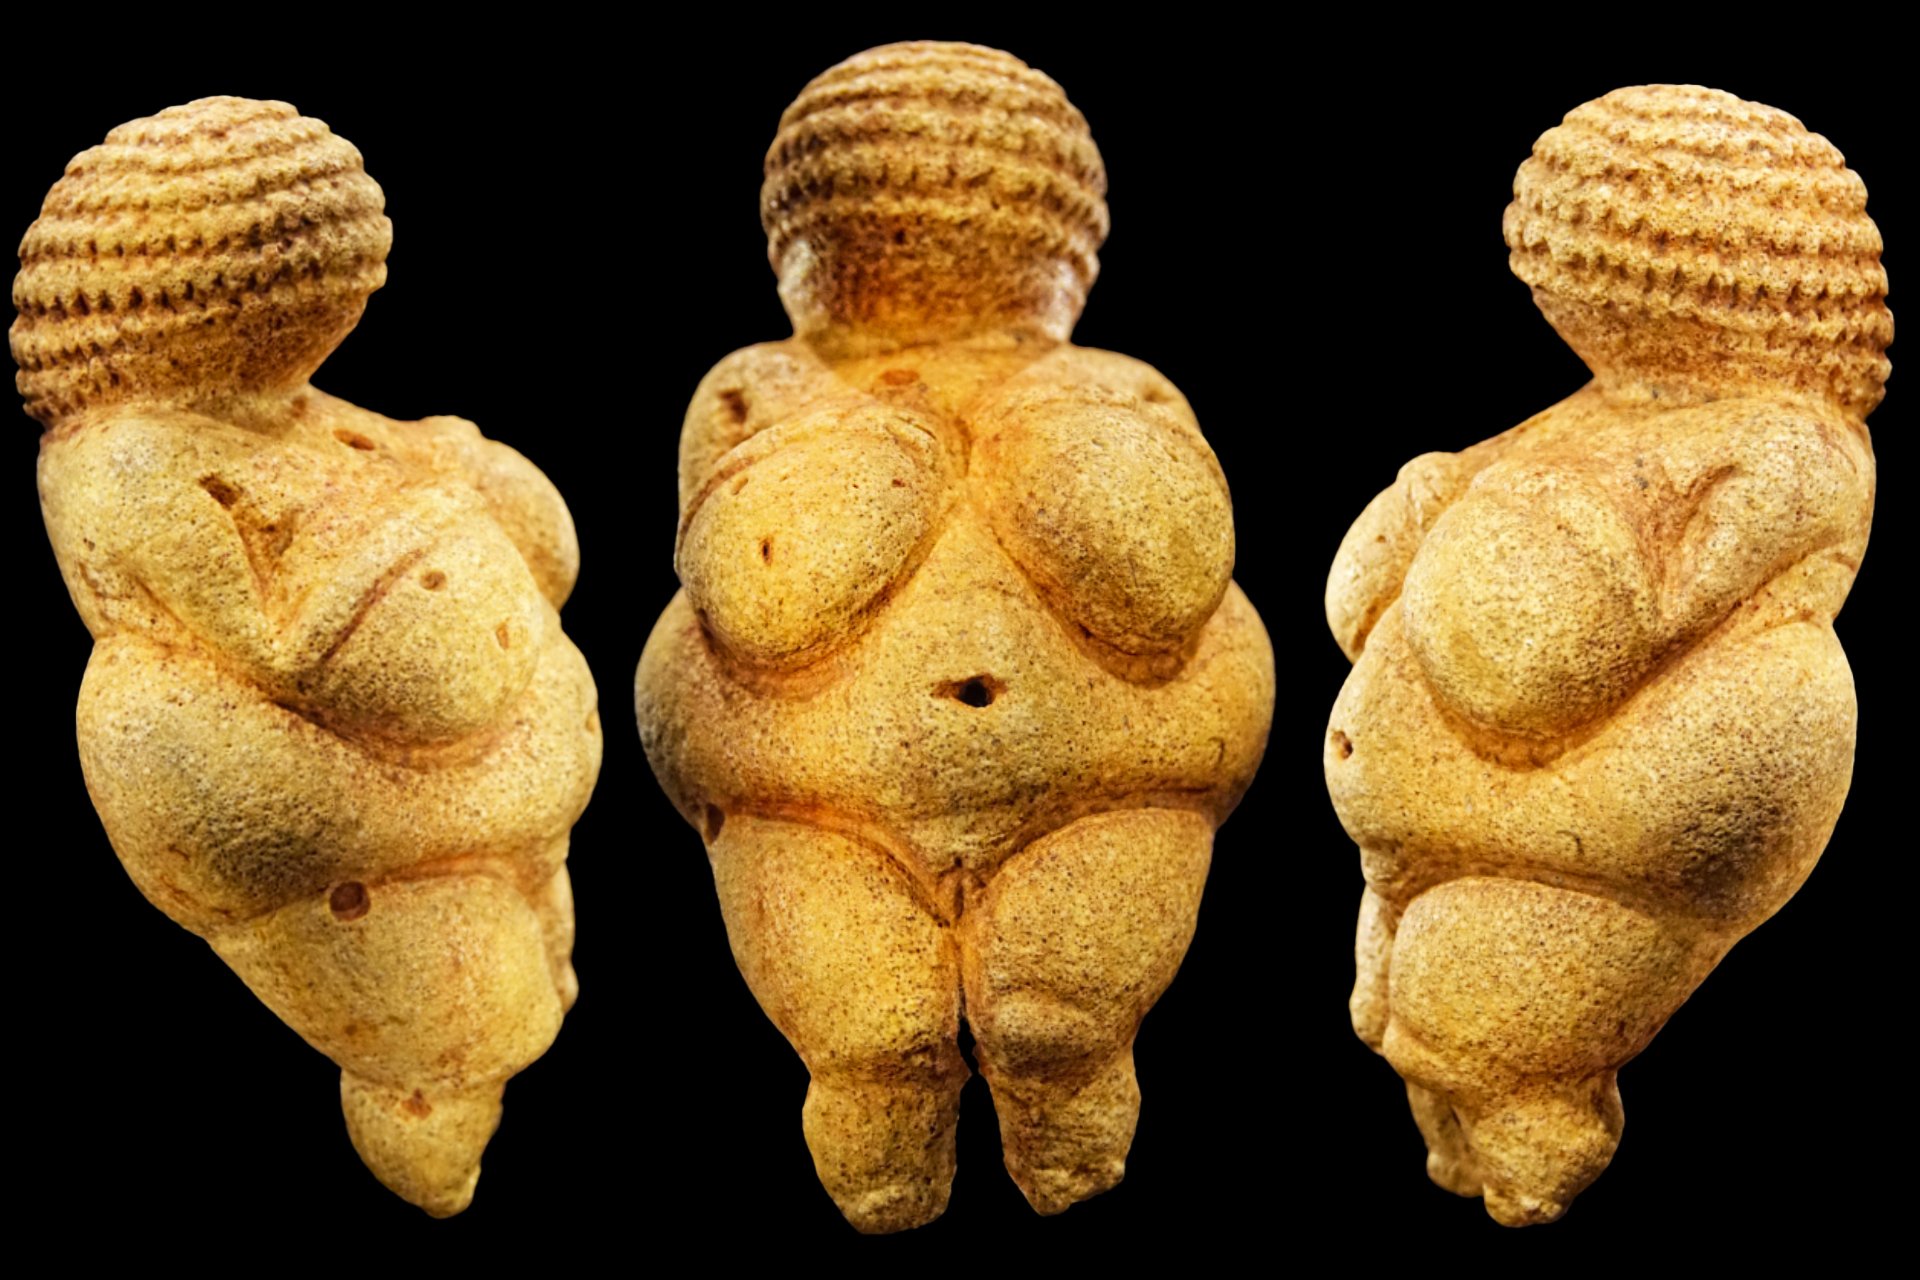 Three images of Venus of Willendorf, each facing a different direction, a light-colored statue of a woman with a large bust and hips and a high hairstyle, on a black surface.